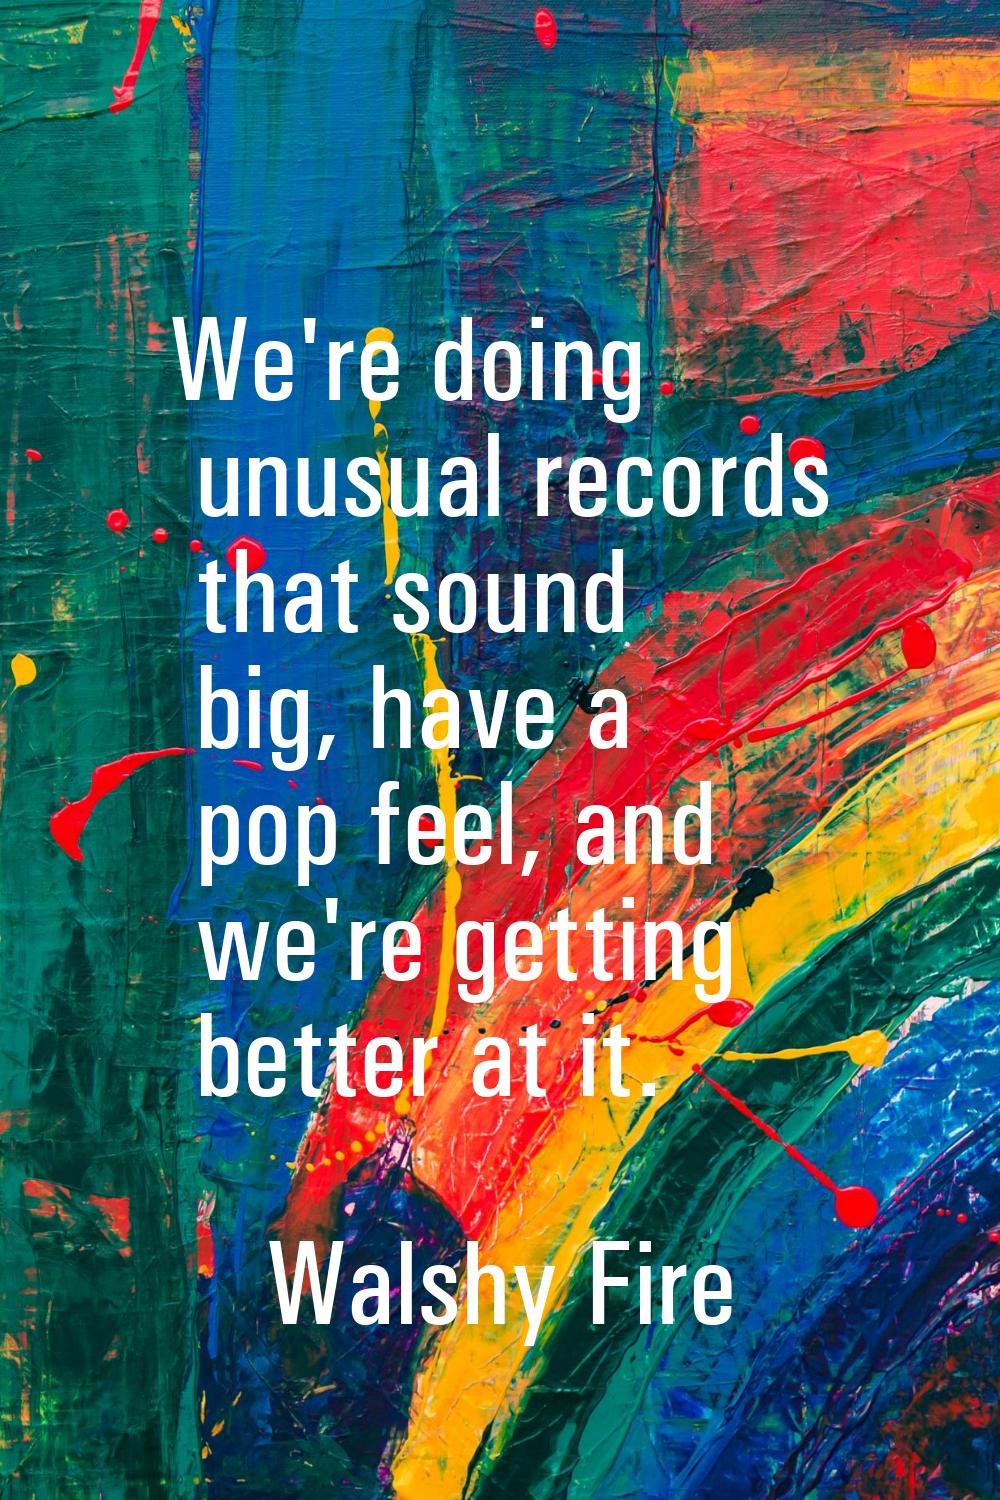 We're doing unusual records that sound big, have a pop feel, and we're getting better at it.